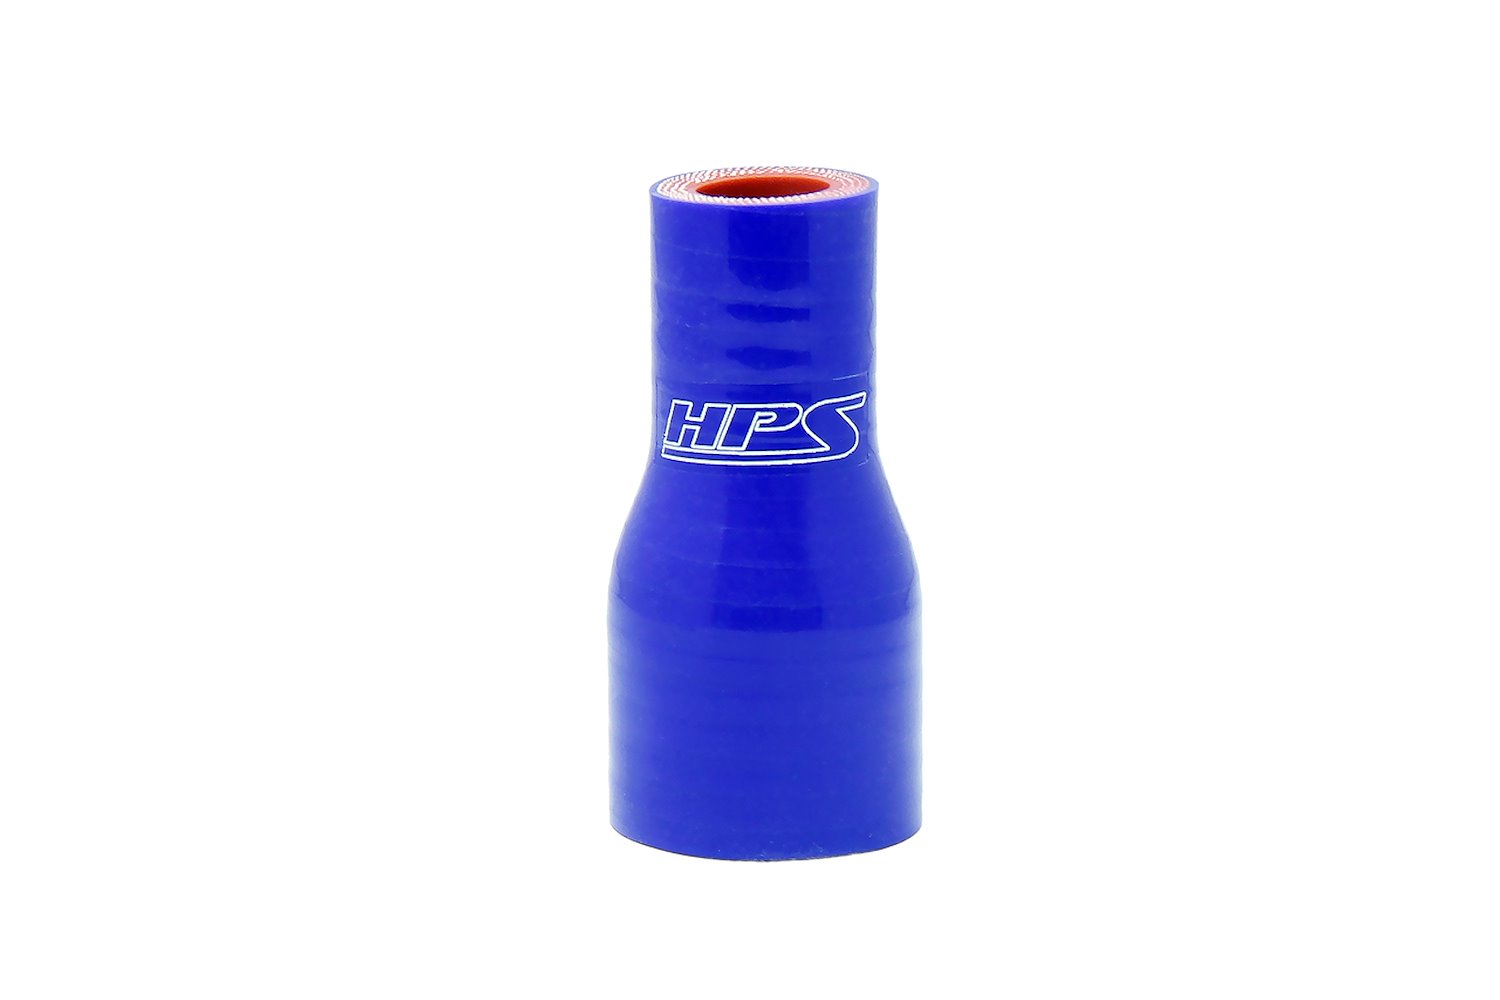 HTSR-062-125-BLUE Silicone Reducer Hose, High-Temp 4-Ply Reinforced, 5/8 in. - 1-1/4 in. ID, 3 in. Long, Blue